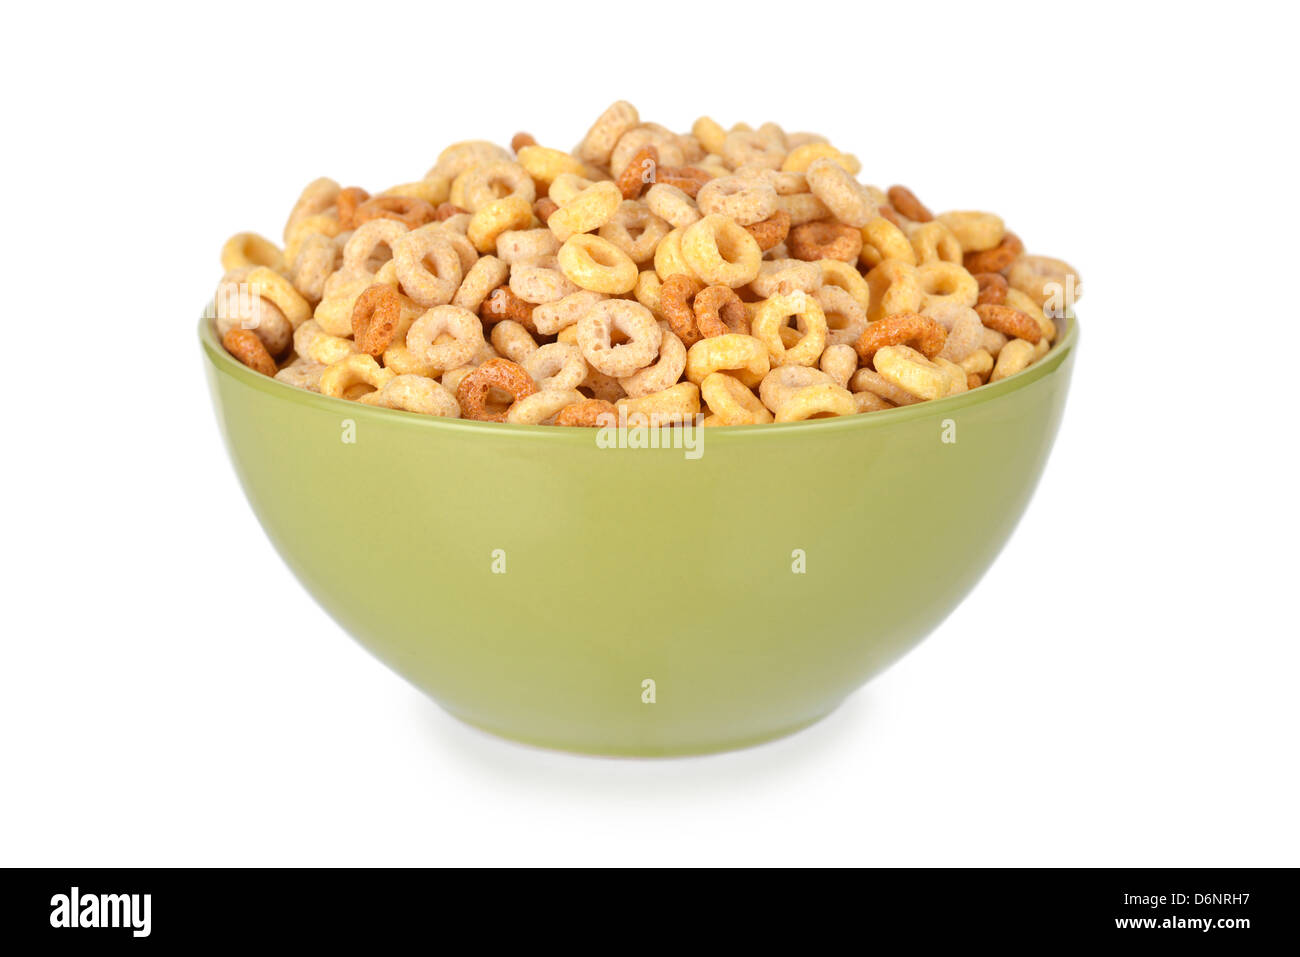 Bowl of Cheerios Cereal, Cold Breakfast Cereal Stock Photo